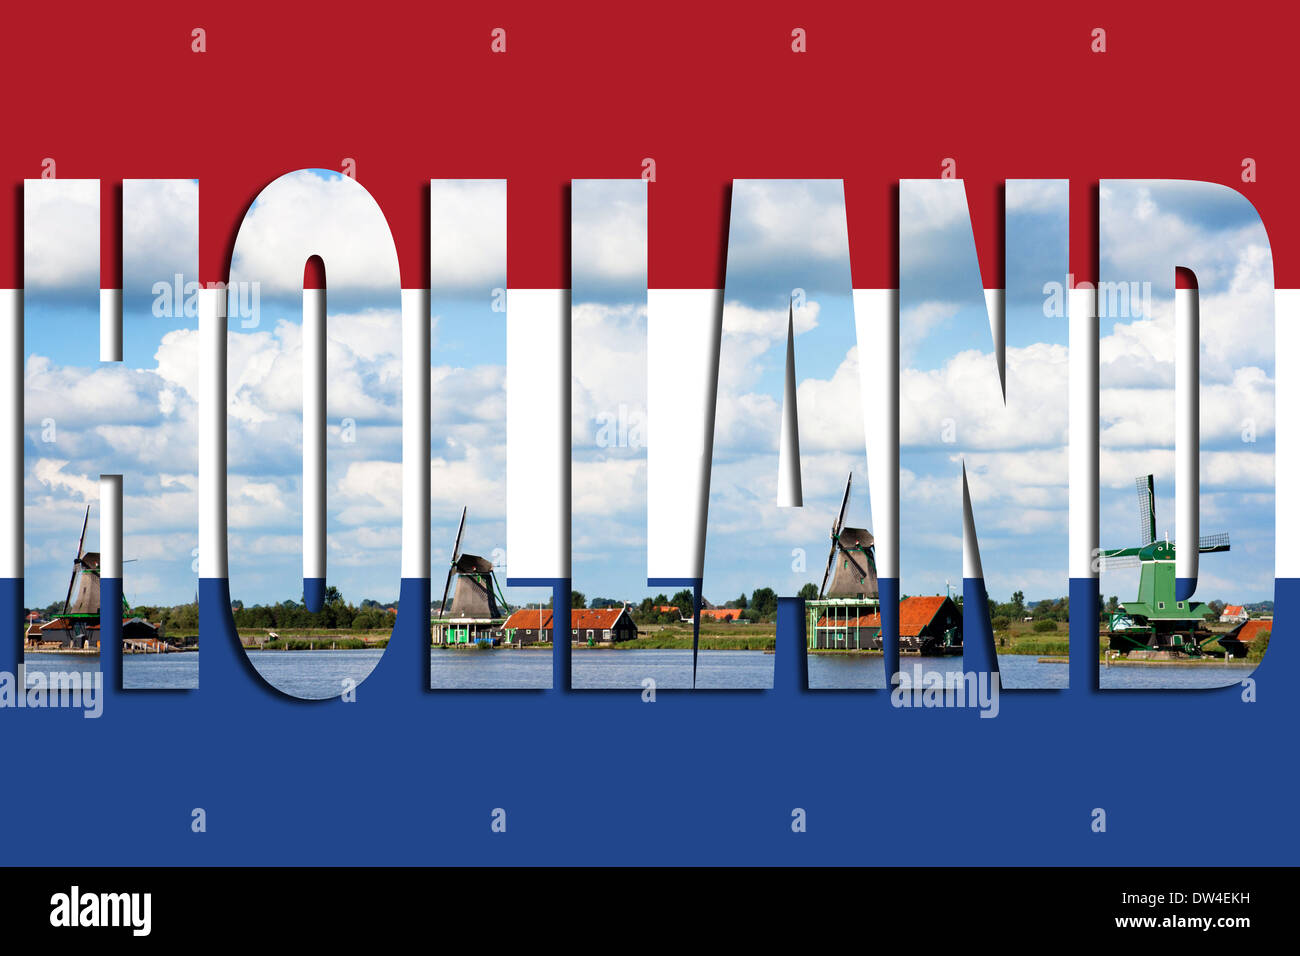 Flag of Holland with windmills in the text Stock Photo